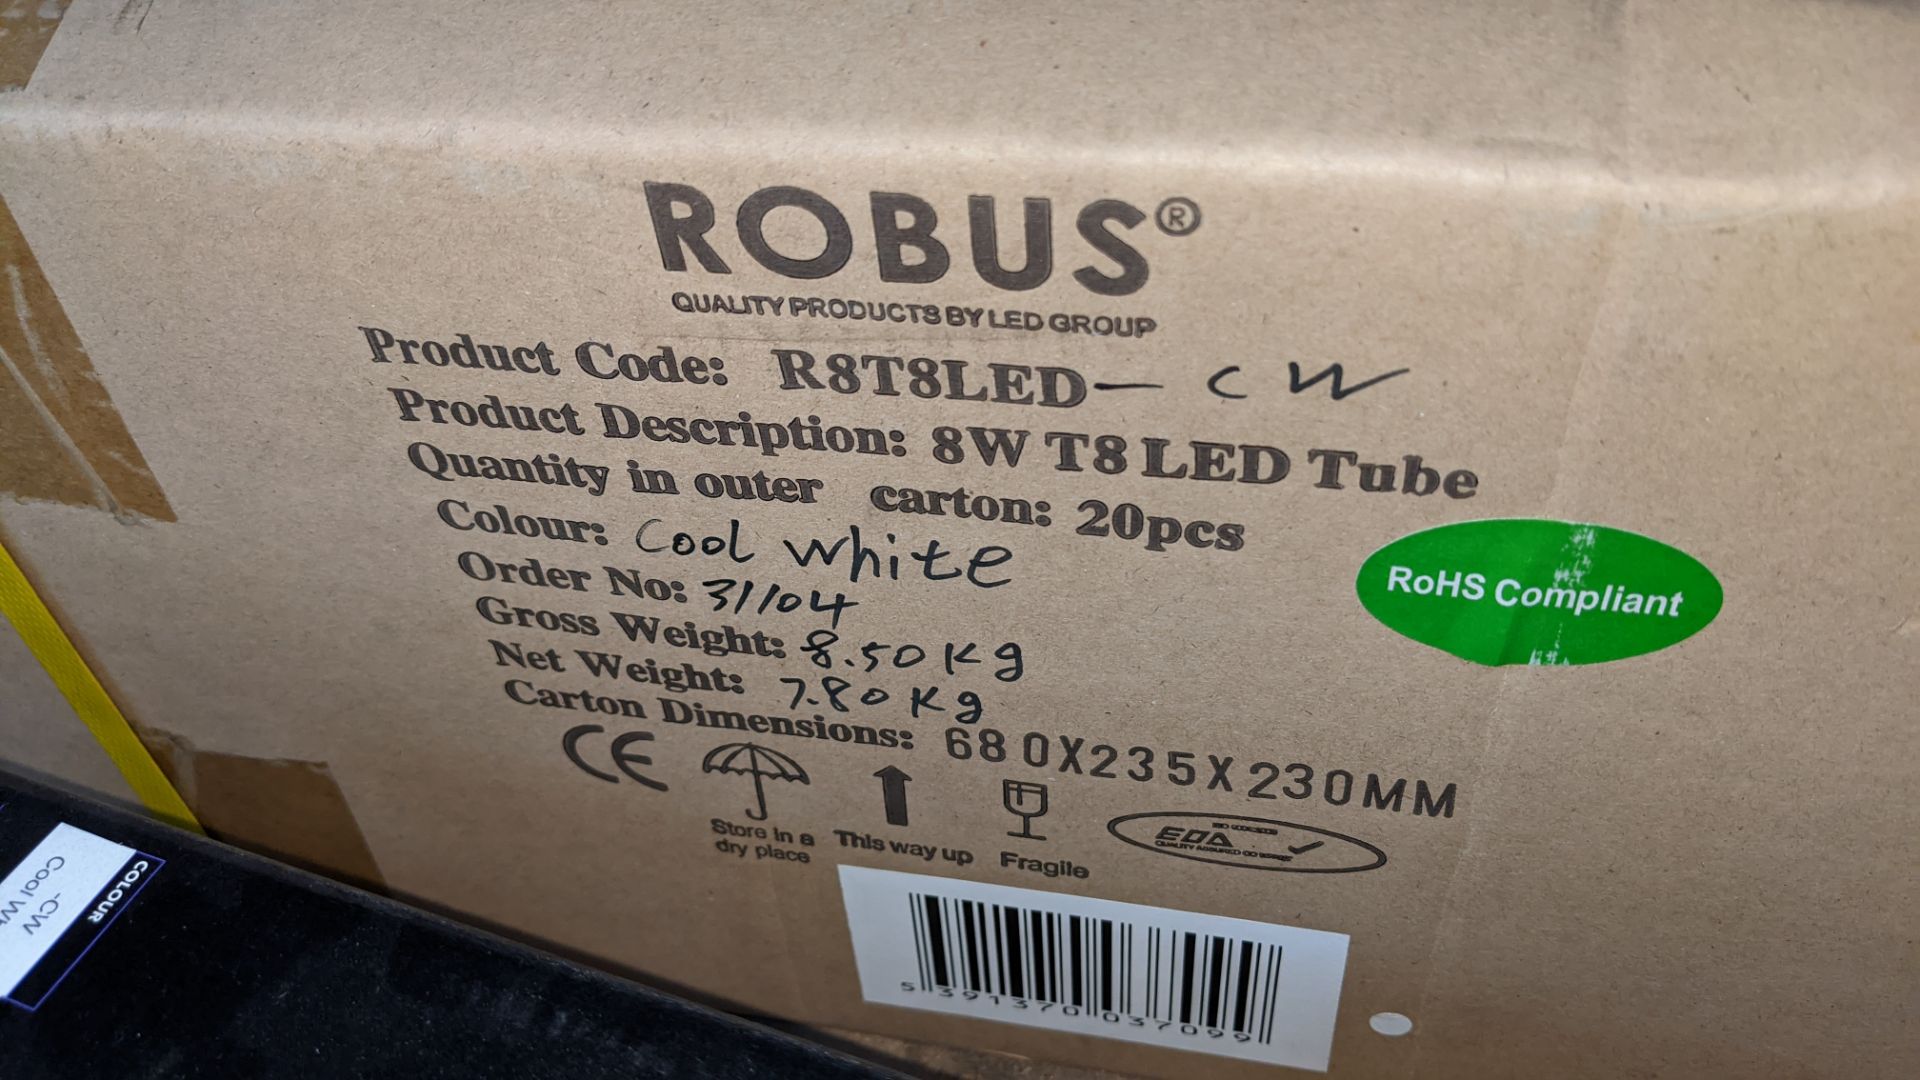 20 off Robus 8W T8 LED tubes, in cool white - Image 3 of 3